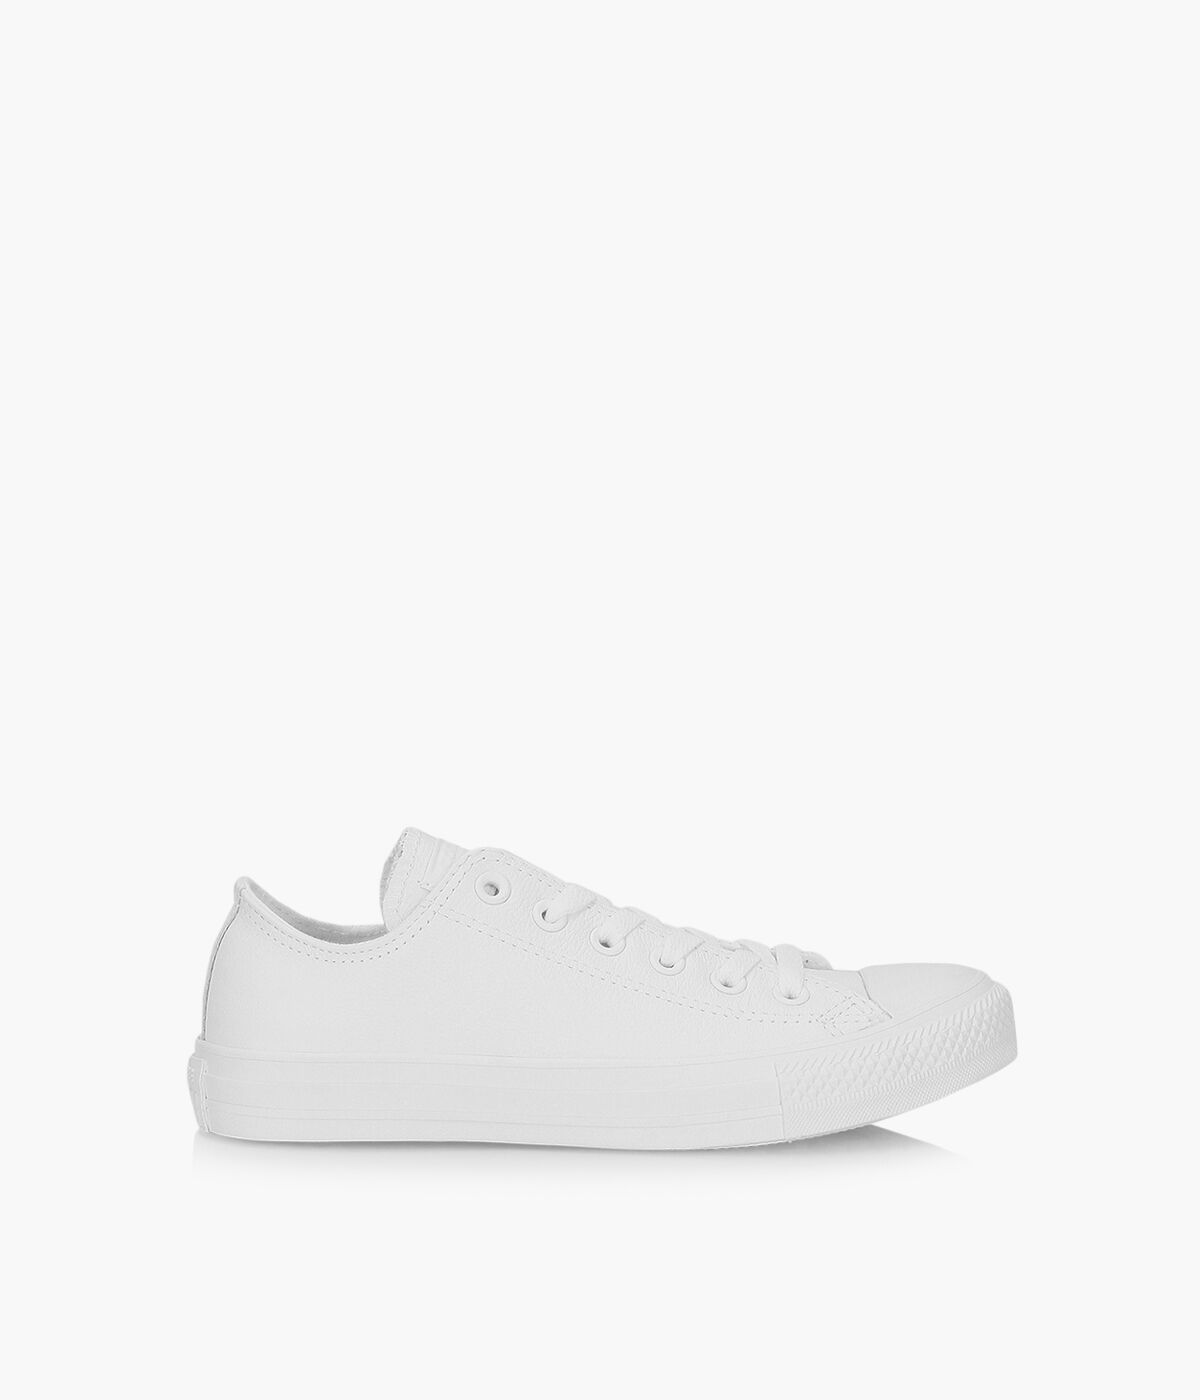 converse chuck taylor all star leather ox white